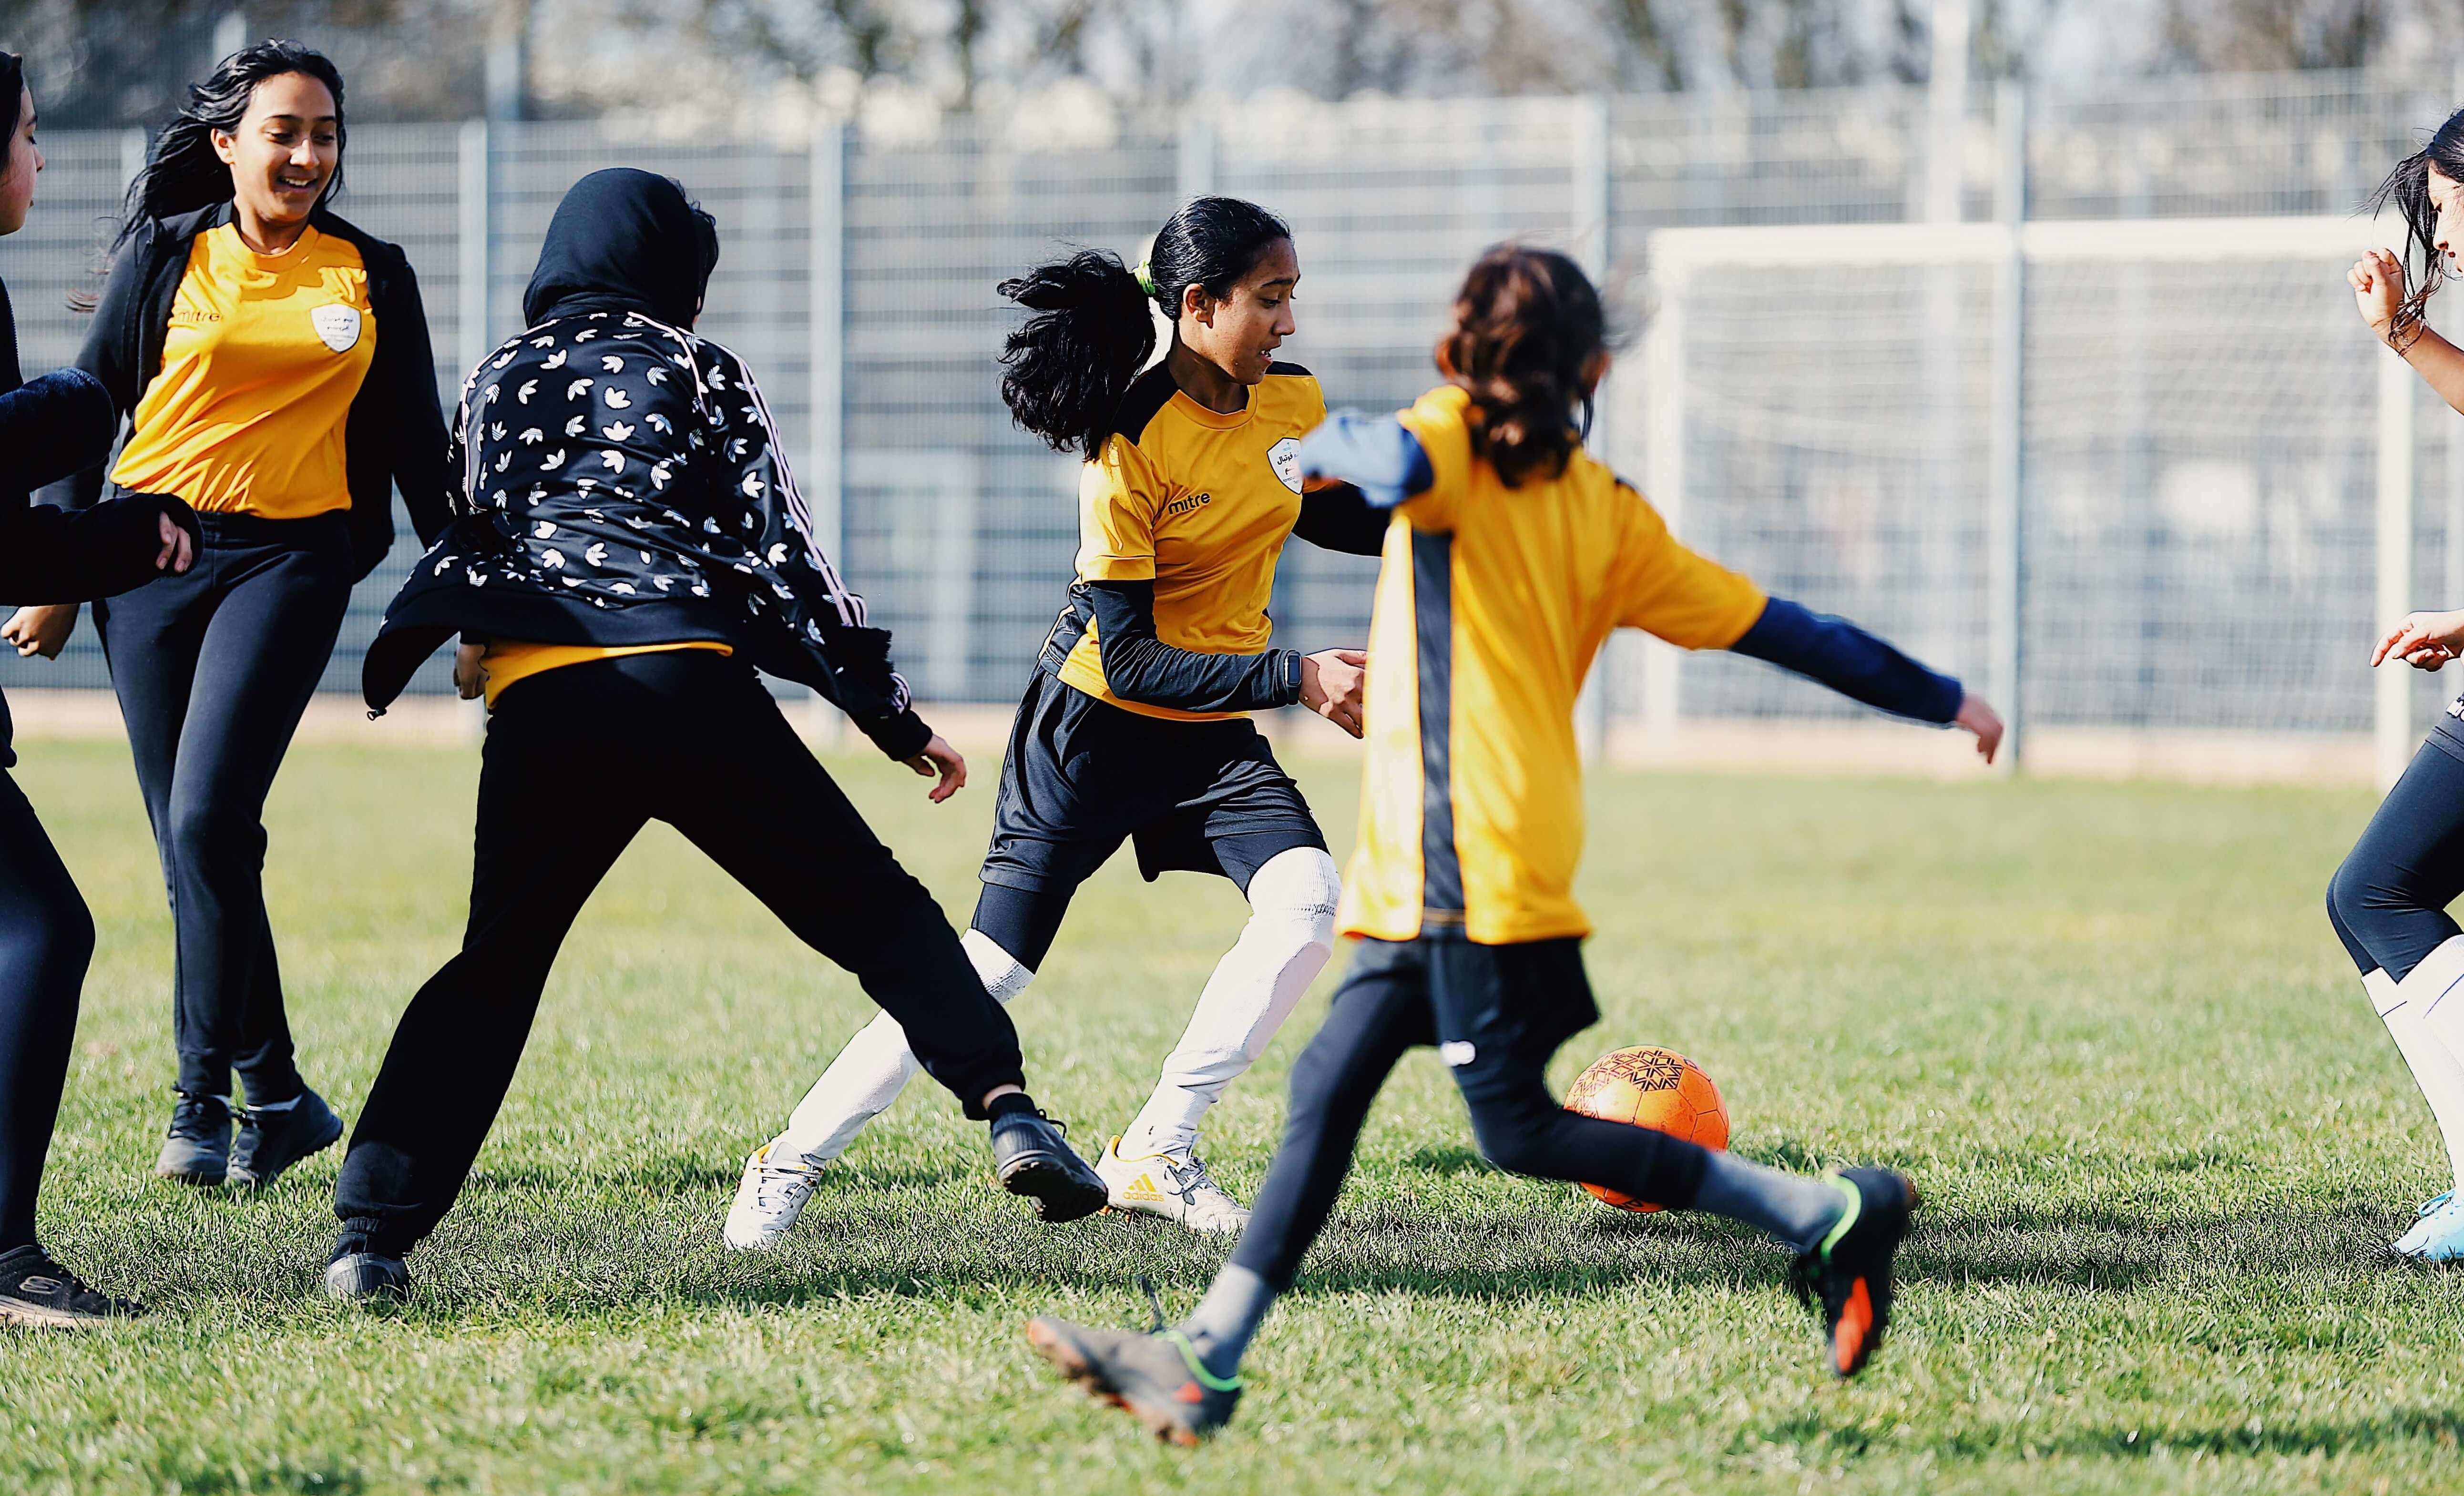 A group of girls playing football